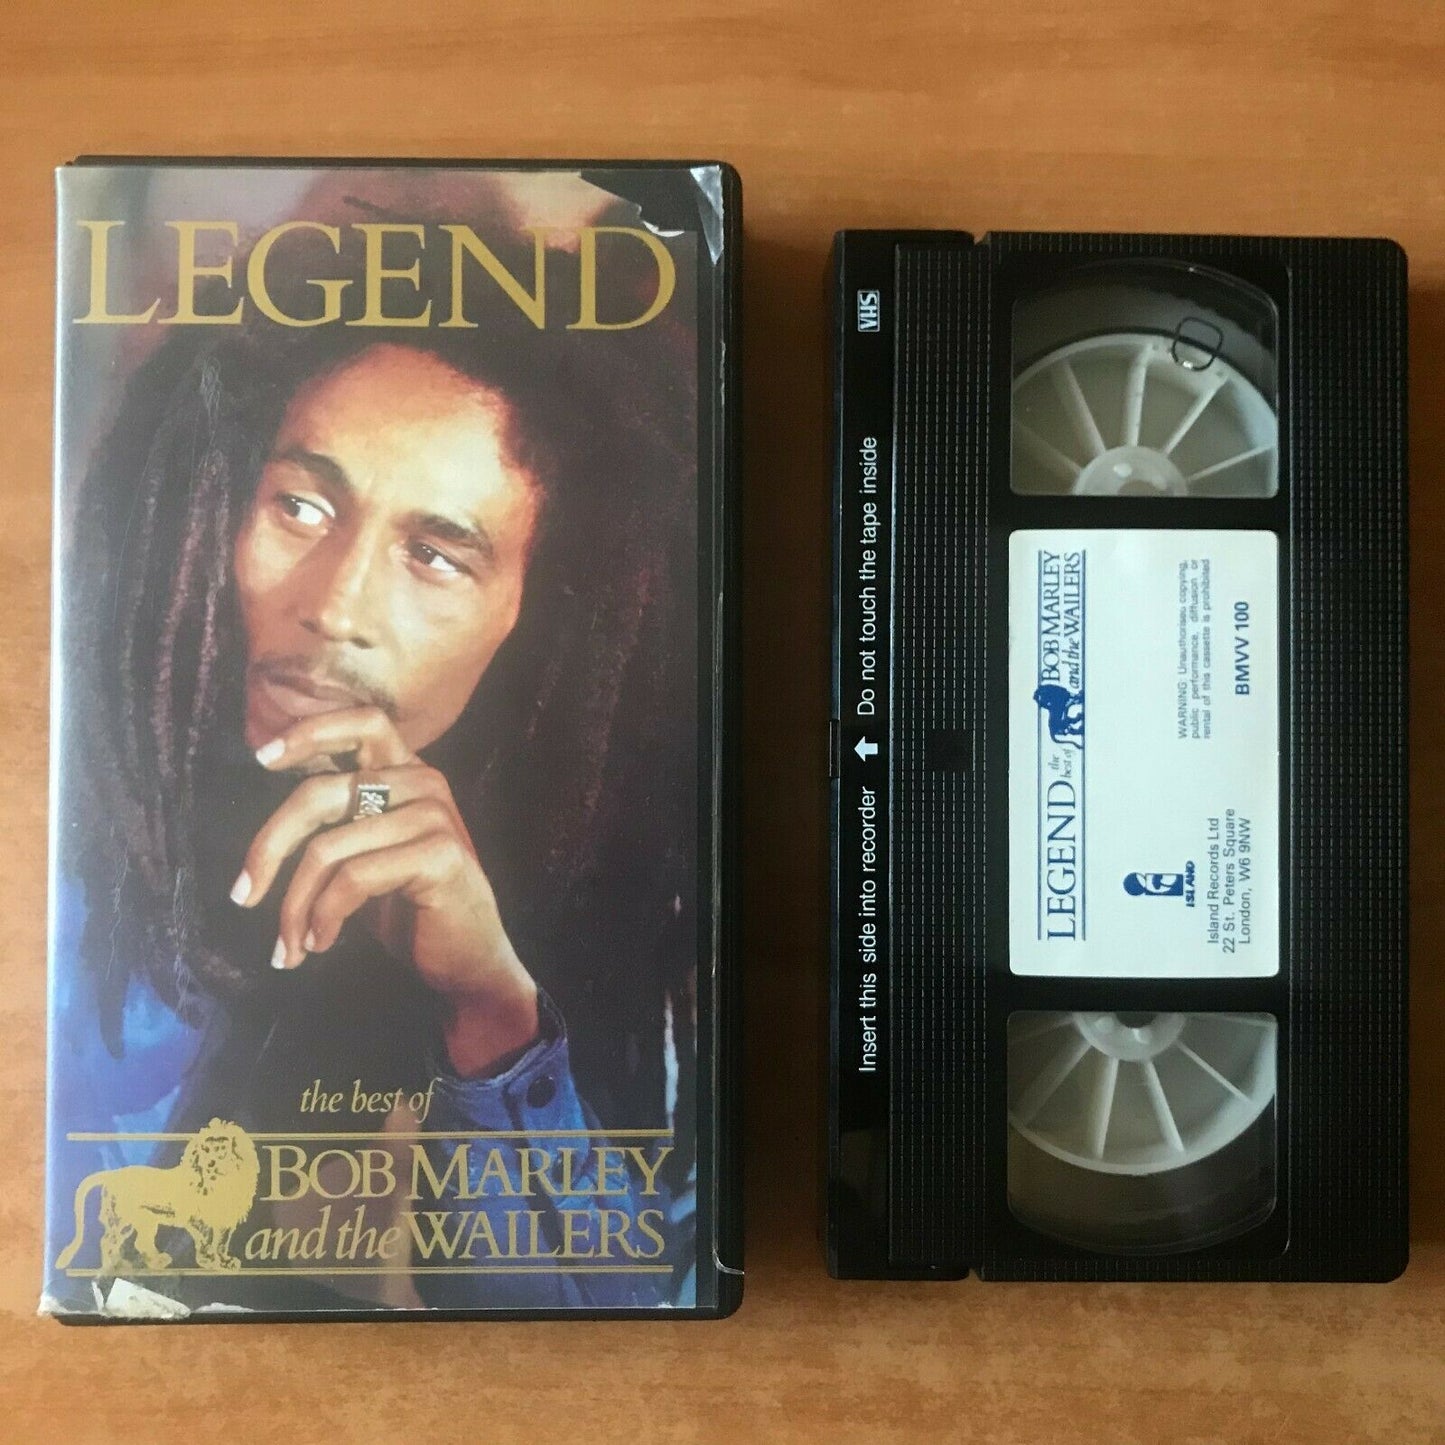 Legend [Bob Marley And The Wailers] The Best Of: "Exodus" - Music - Pal VHS-